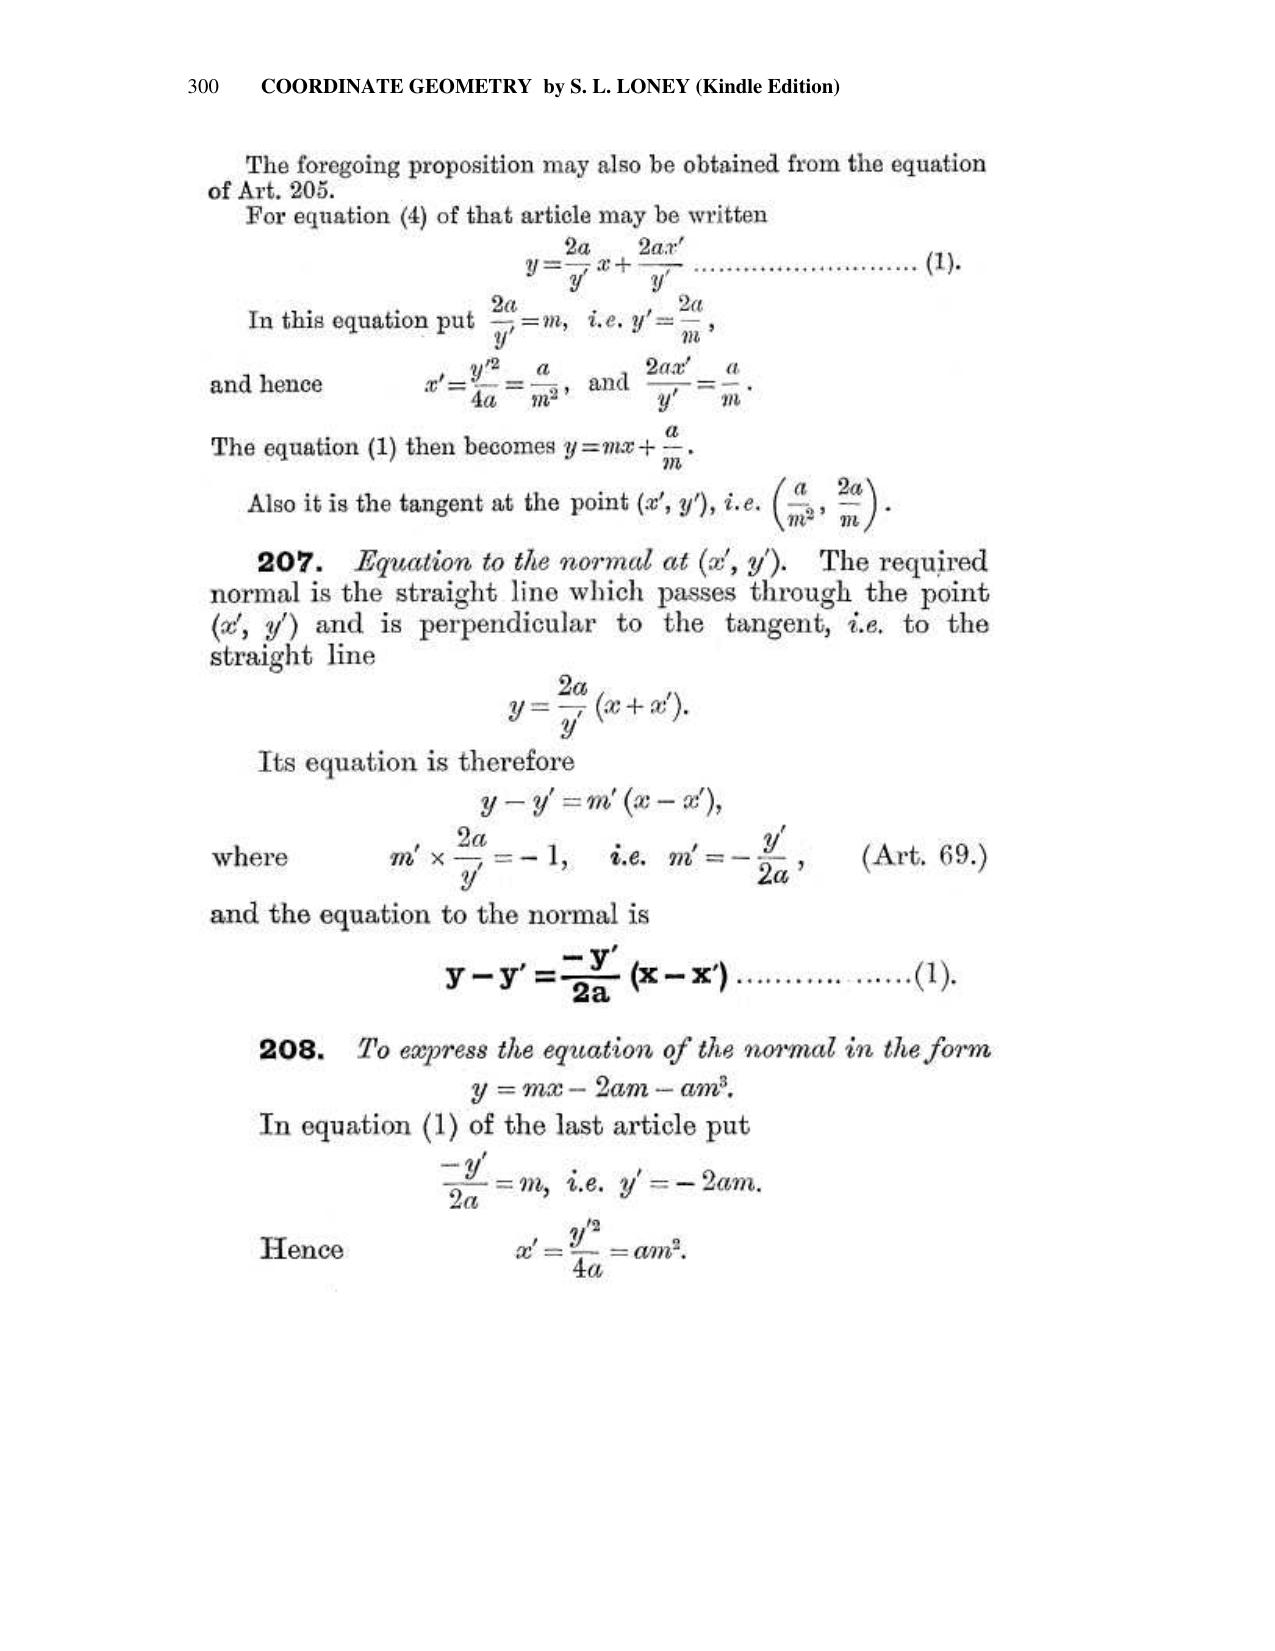 Chapter 10: The Parabola - SL Loney Solutions: The Elements of Coordinate Geometry - Page 14